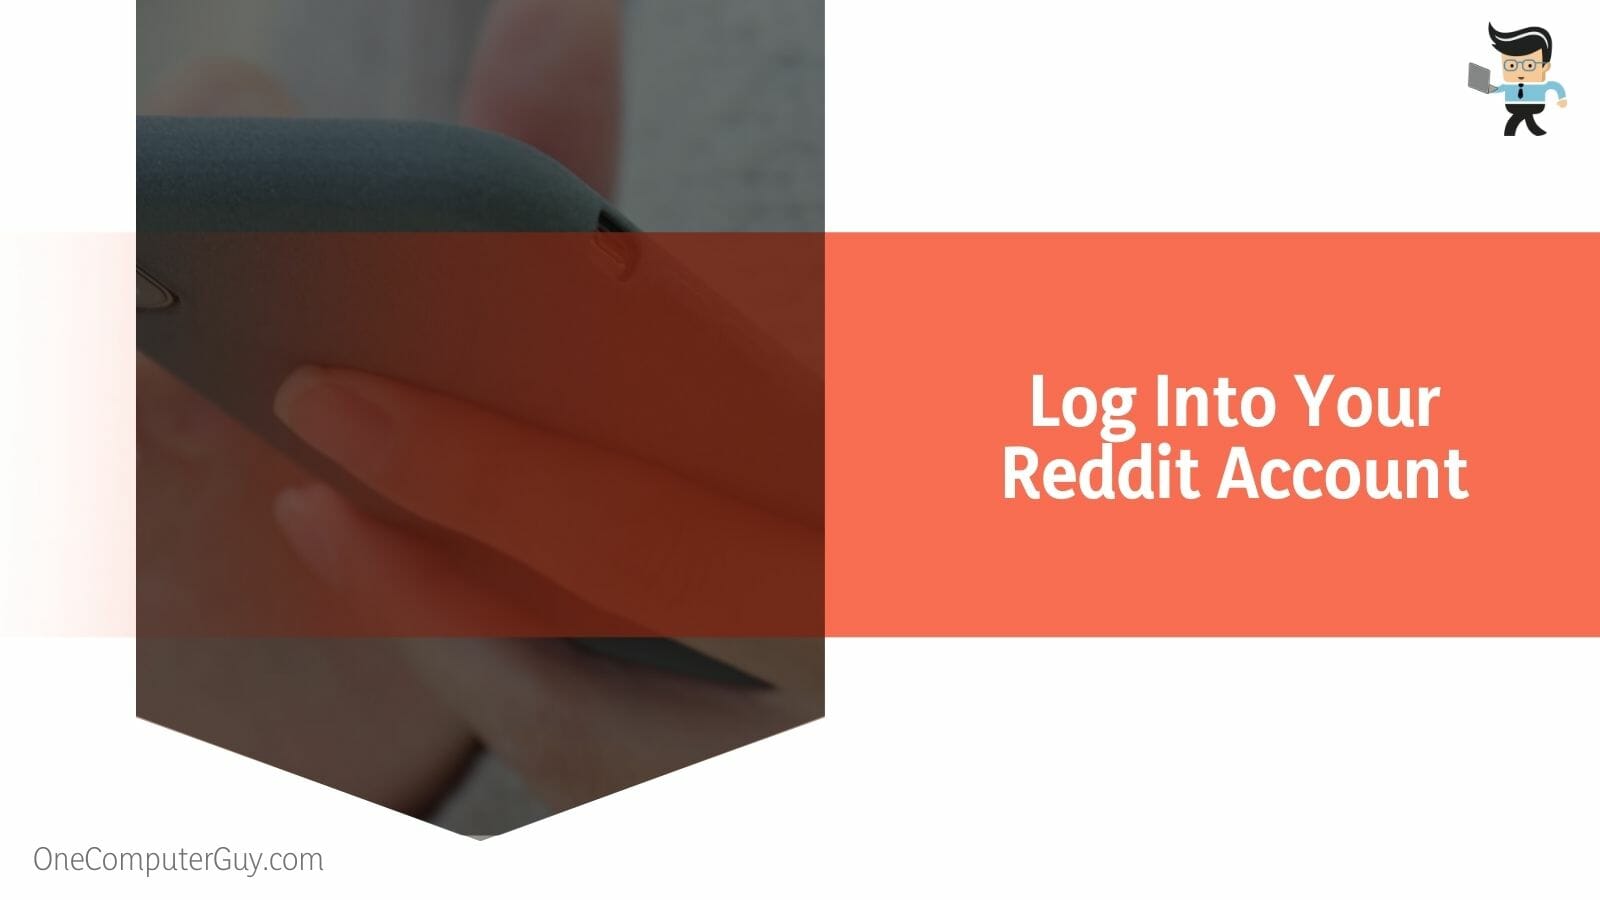 Log Into Your Reddit Account